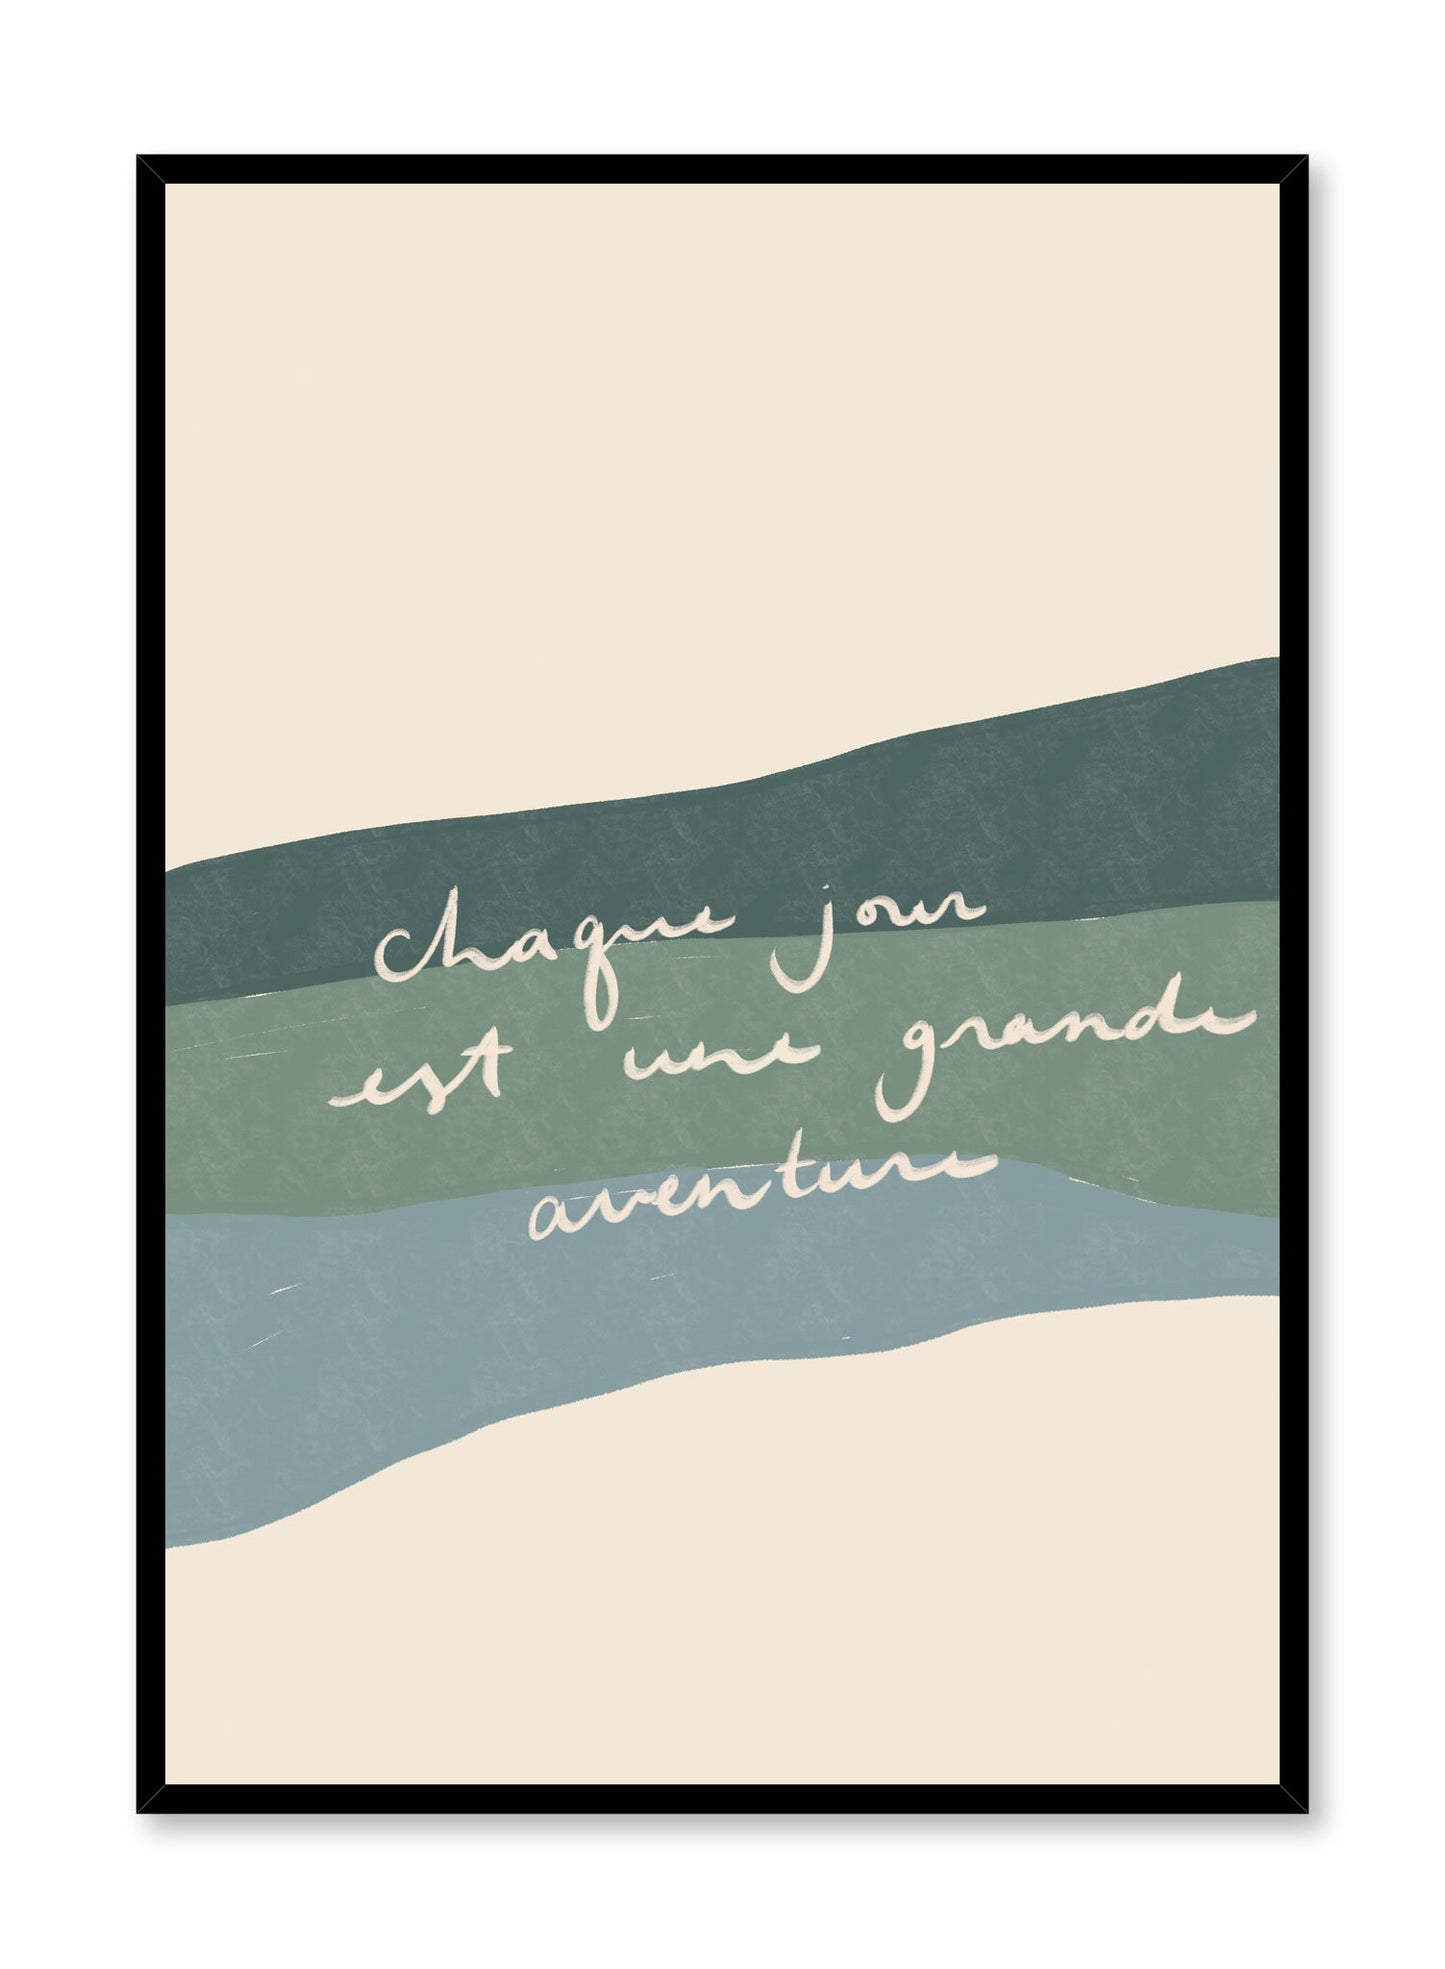 Daily Adventure is a minimalist typography by Opposite Wall of the cursive words "Chaque jour est une grande aventure" in French layered over strokes of blue and green. 